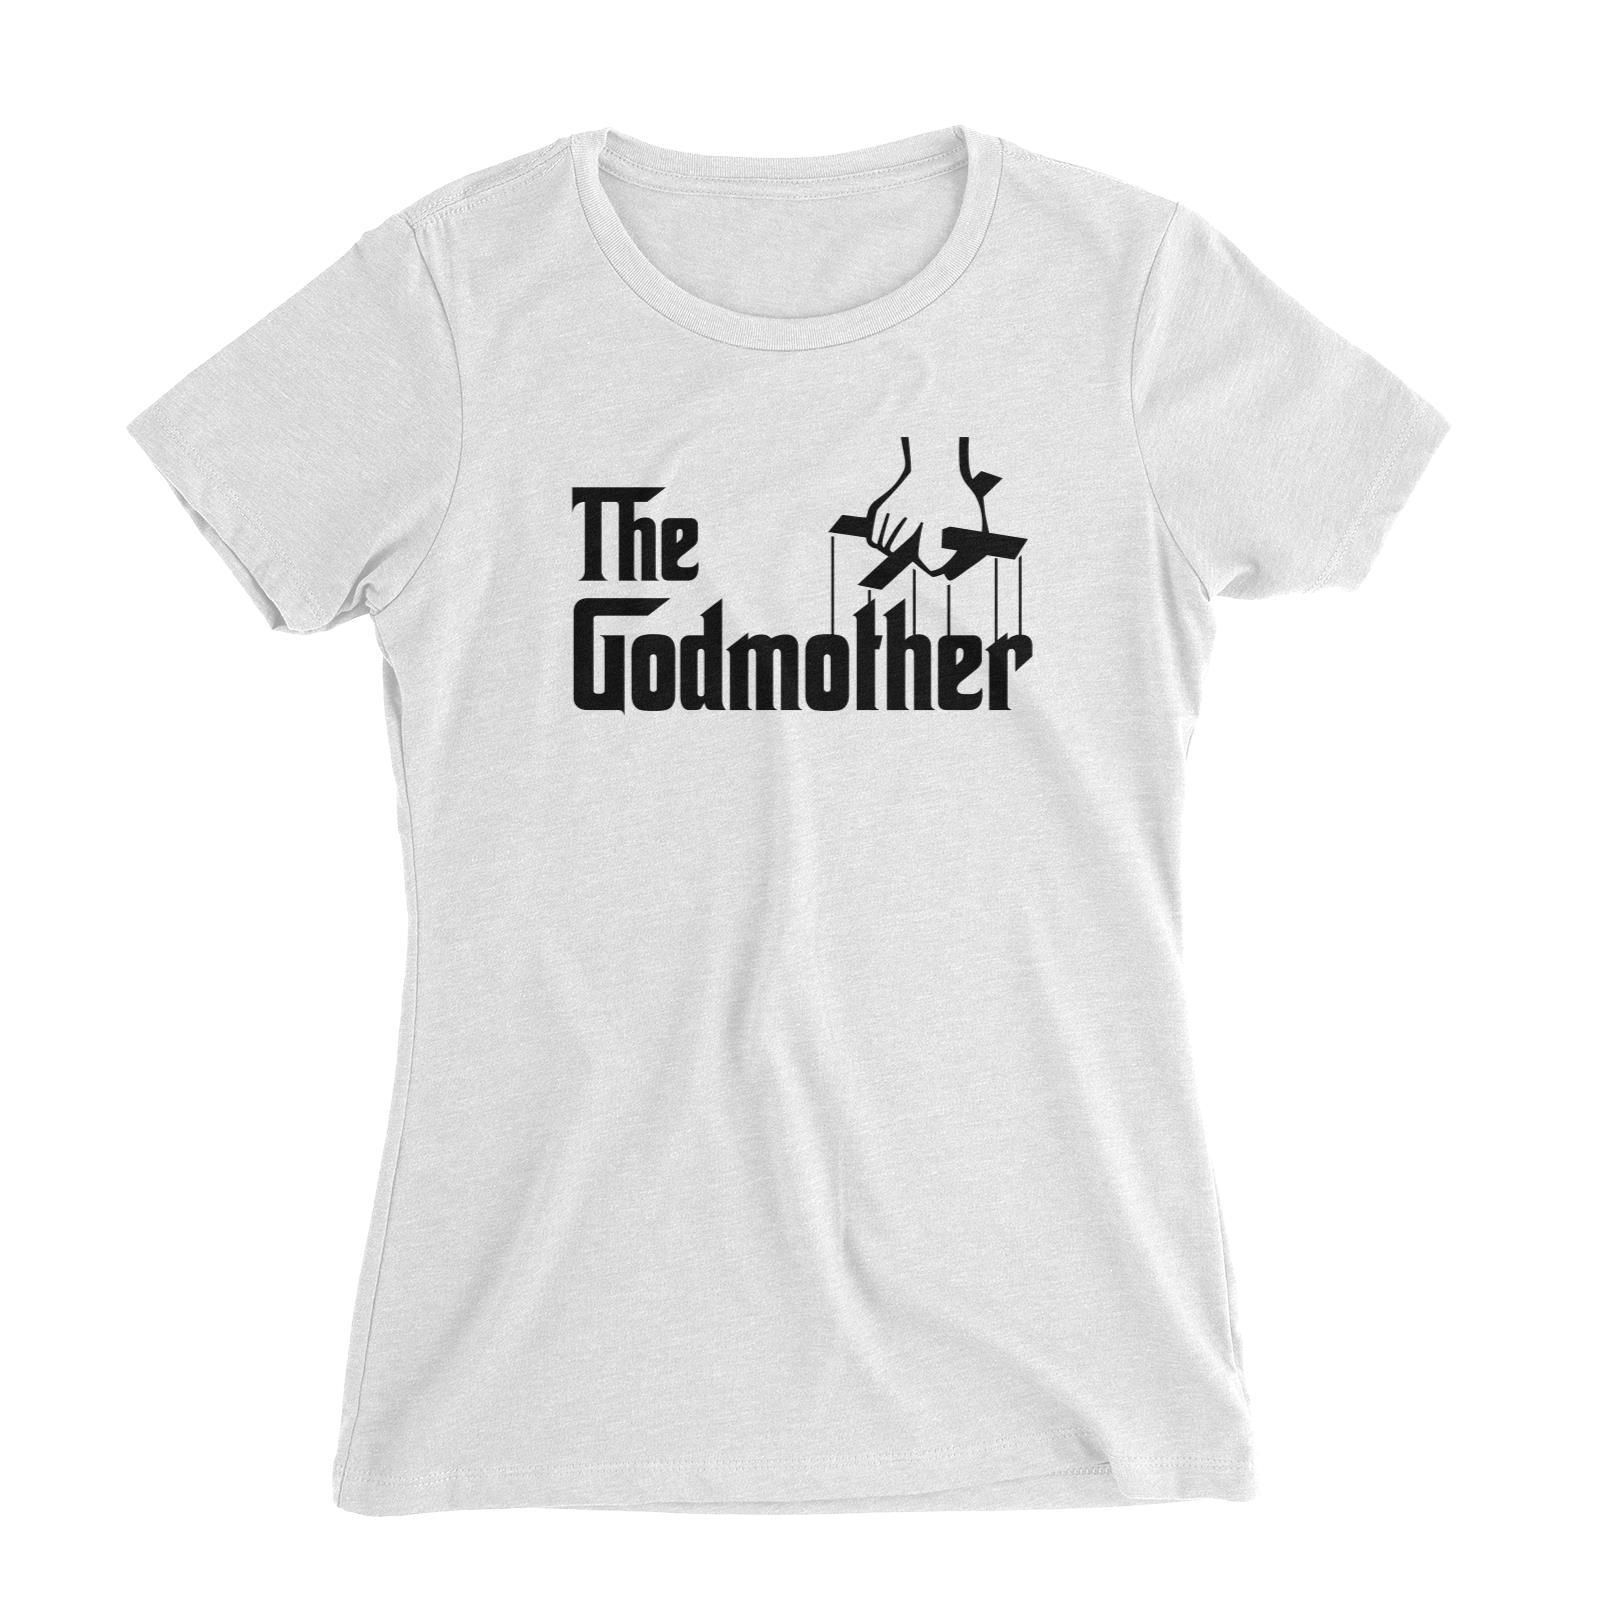 The Godmother Women's Slim Fit T-Shirt Godfather Matching Family